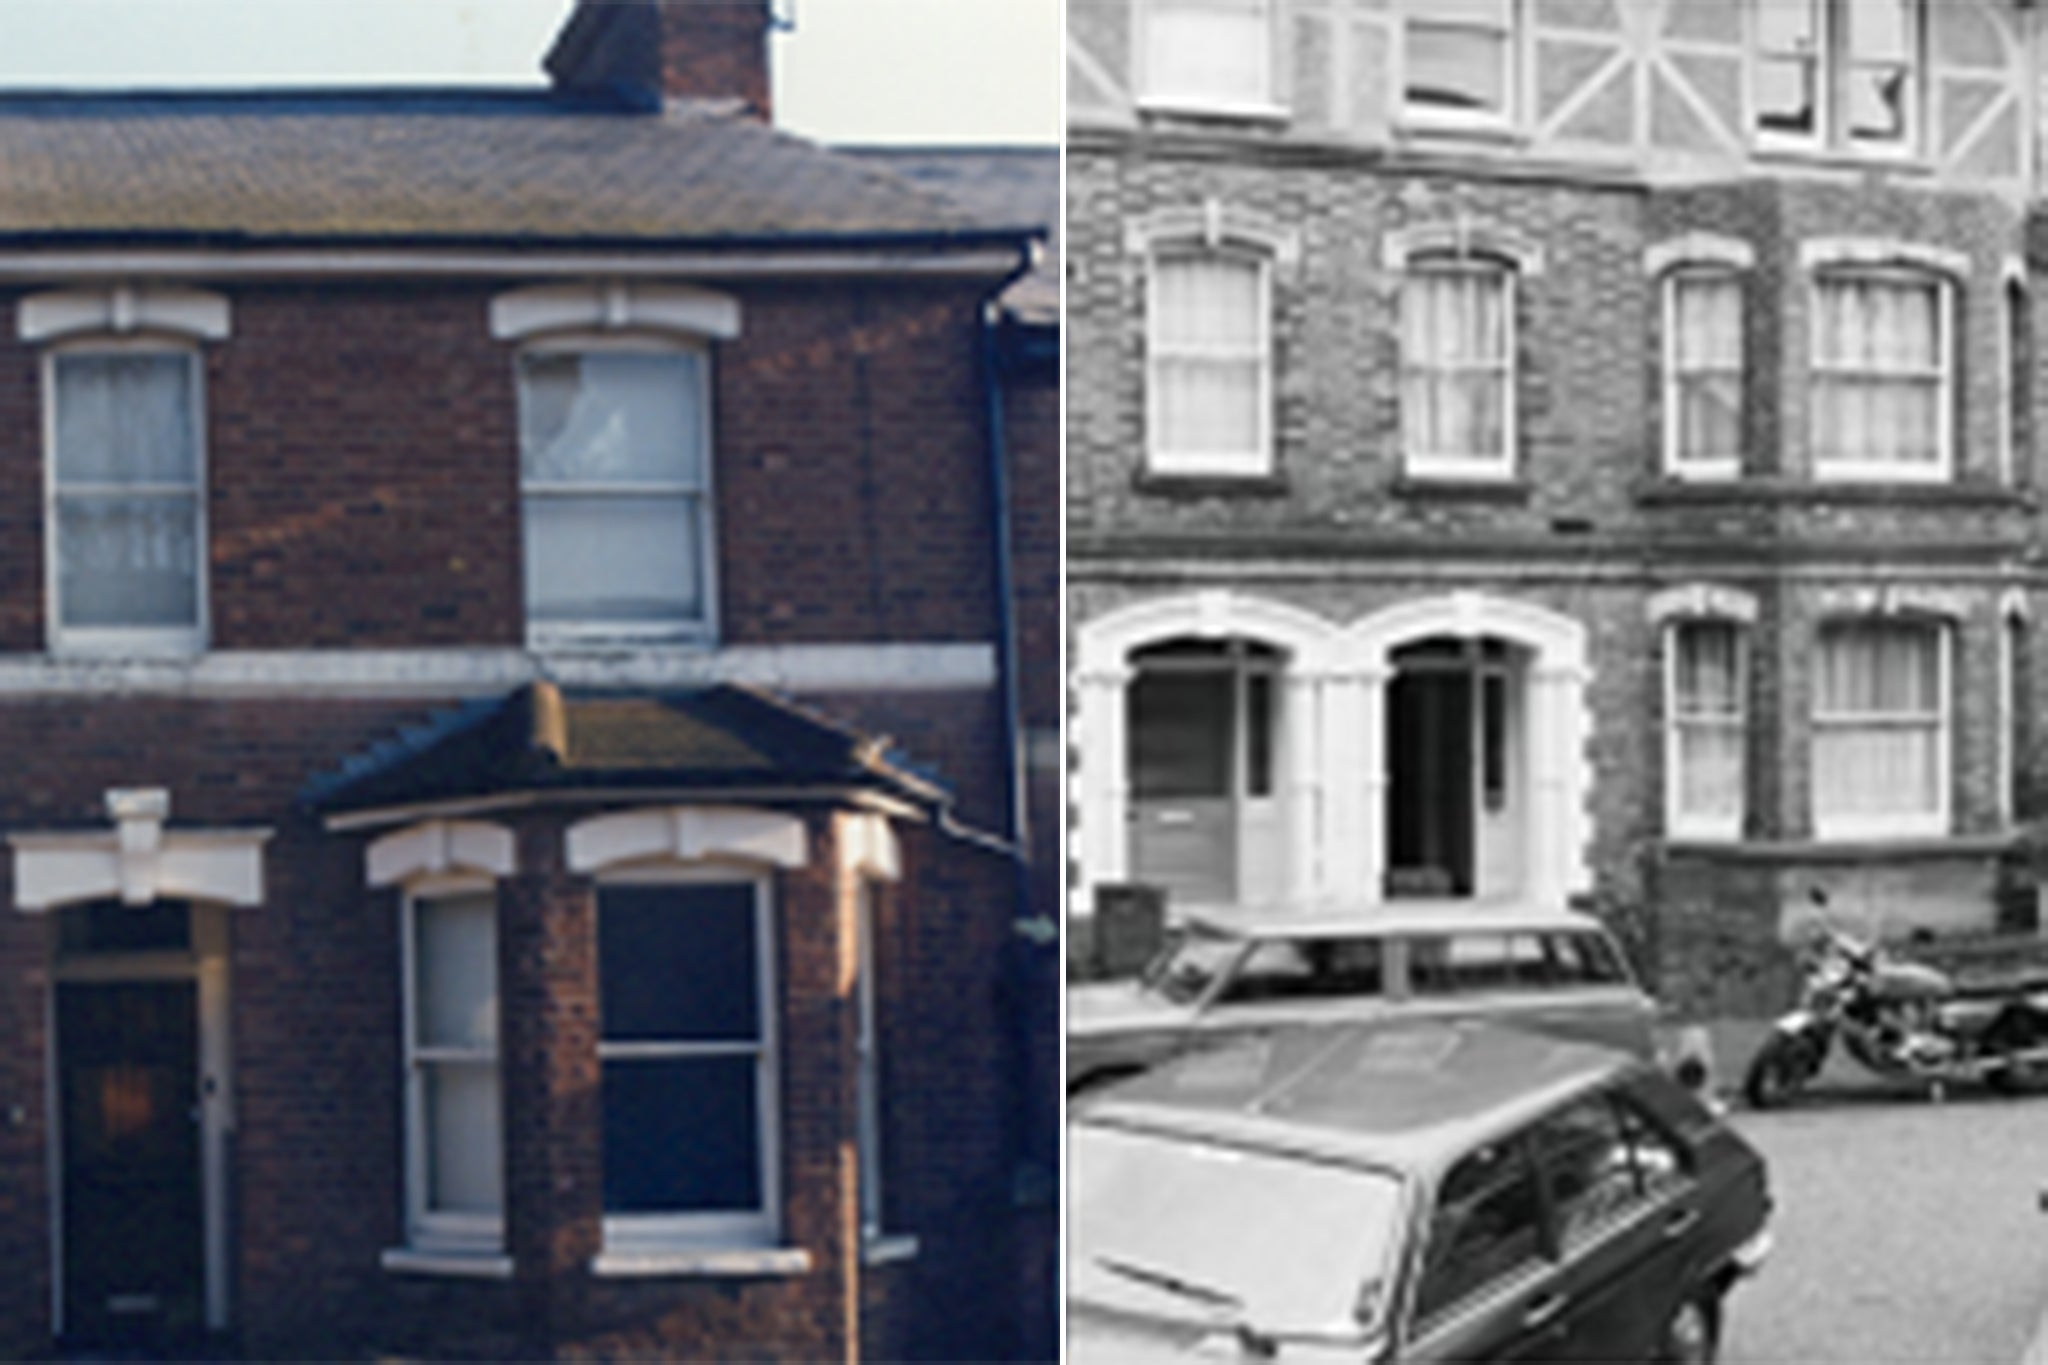 Bedsit homes of Knell and Pierce, the sites of Fuller’s 1987 crimes